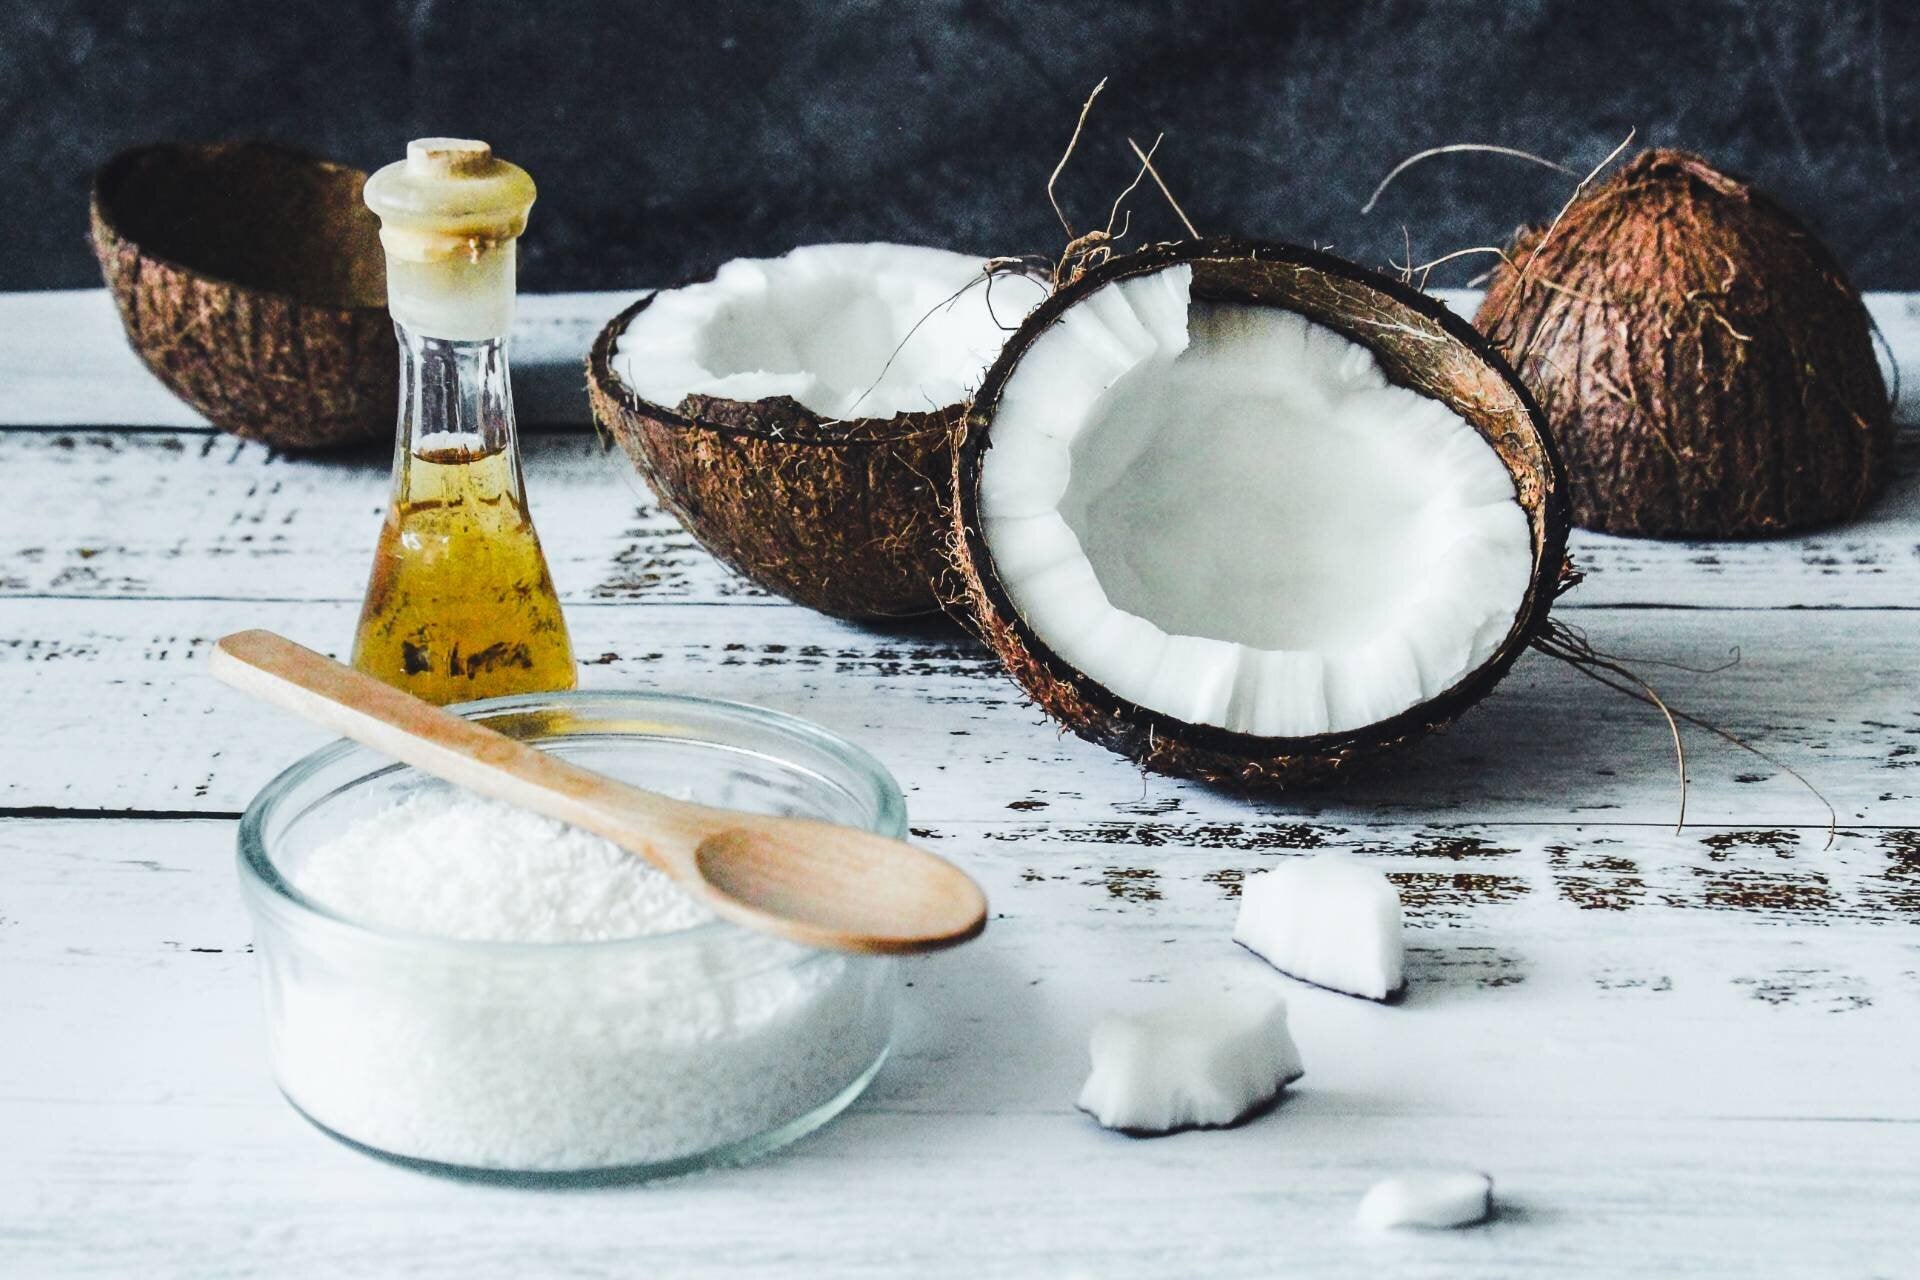 Frequently Asked Questions About Coconut Oil